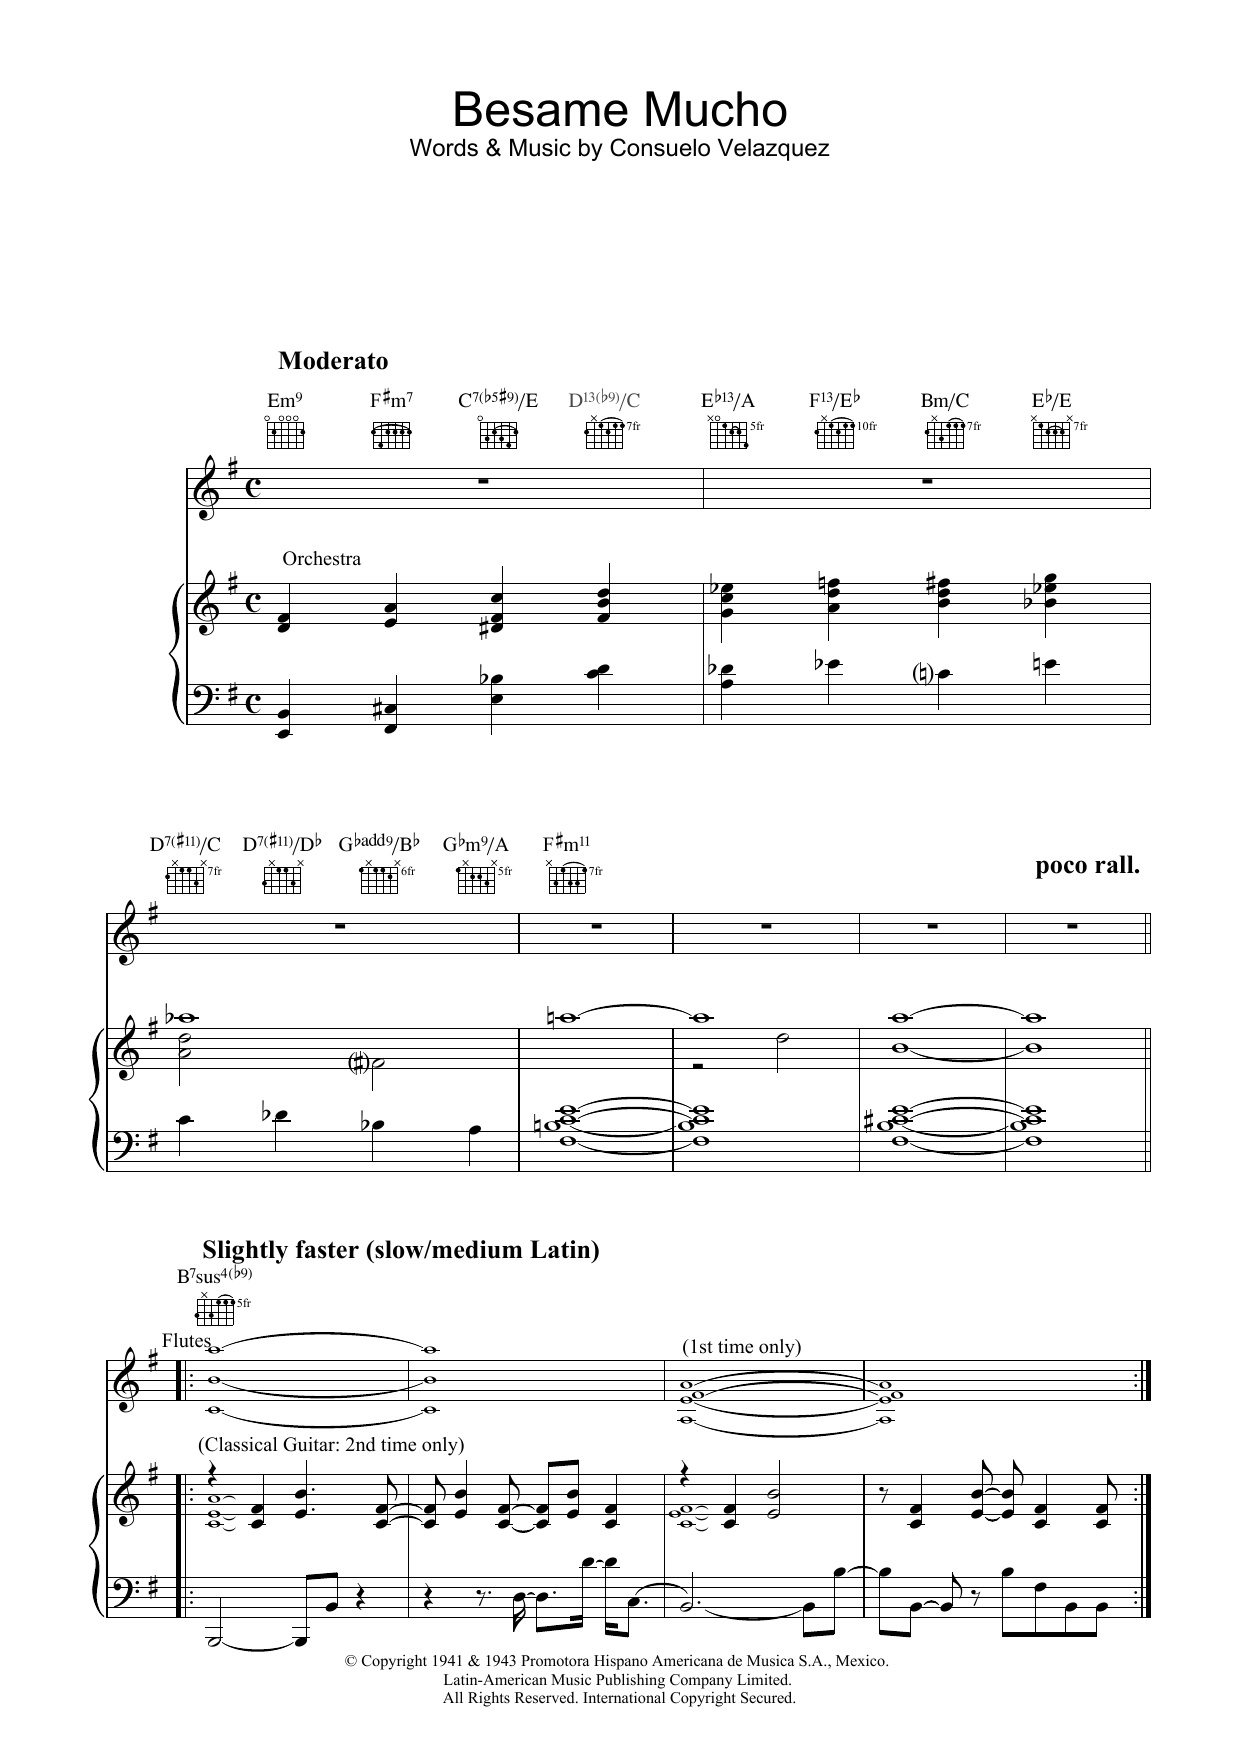 Diana Krall Besame Mucho sheet music notes and chords. Download Printable PDF.